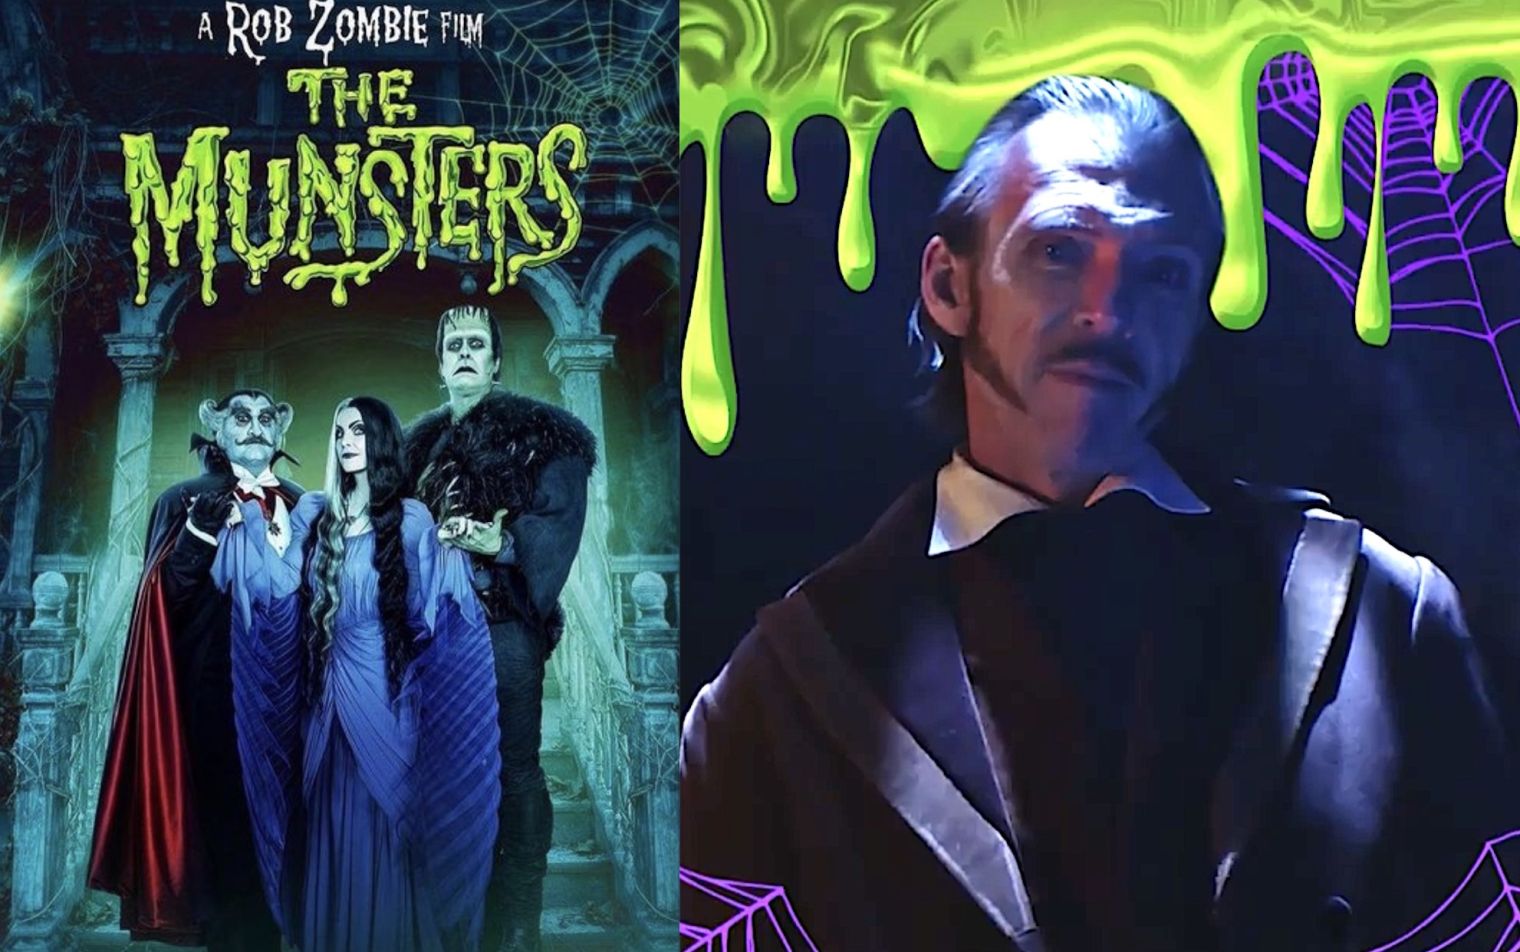 Rob Zombie's latest film 'The Munsters', starring Richard Brake, is now available to buy on DVD & Blu-ray